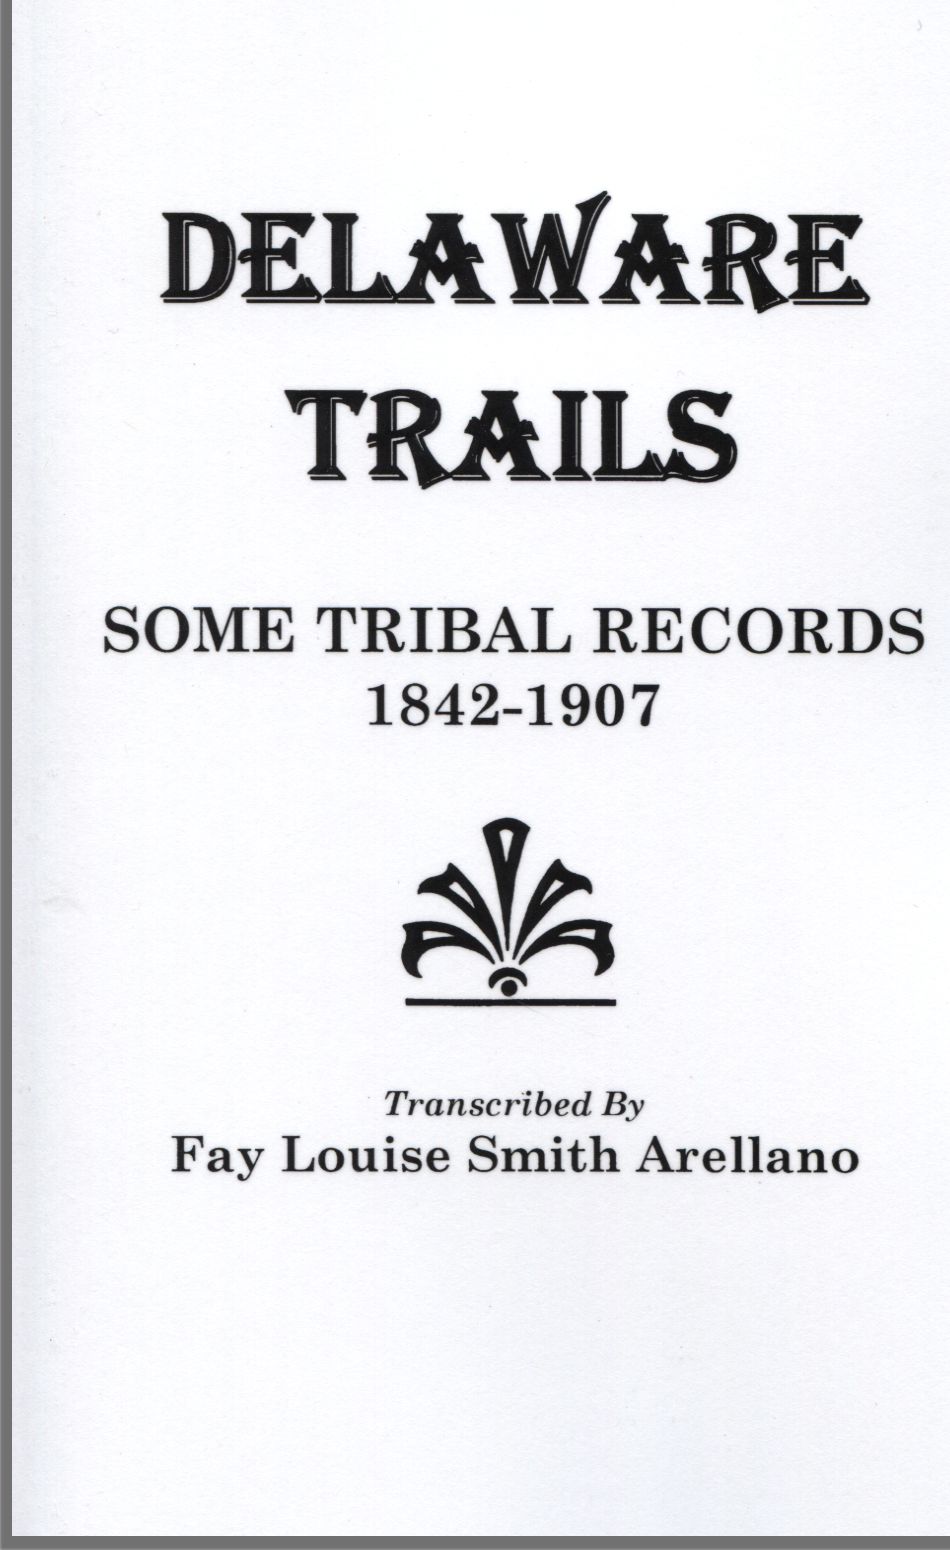 Delaware Trails: Some Tribal Records, 1842-1907